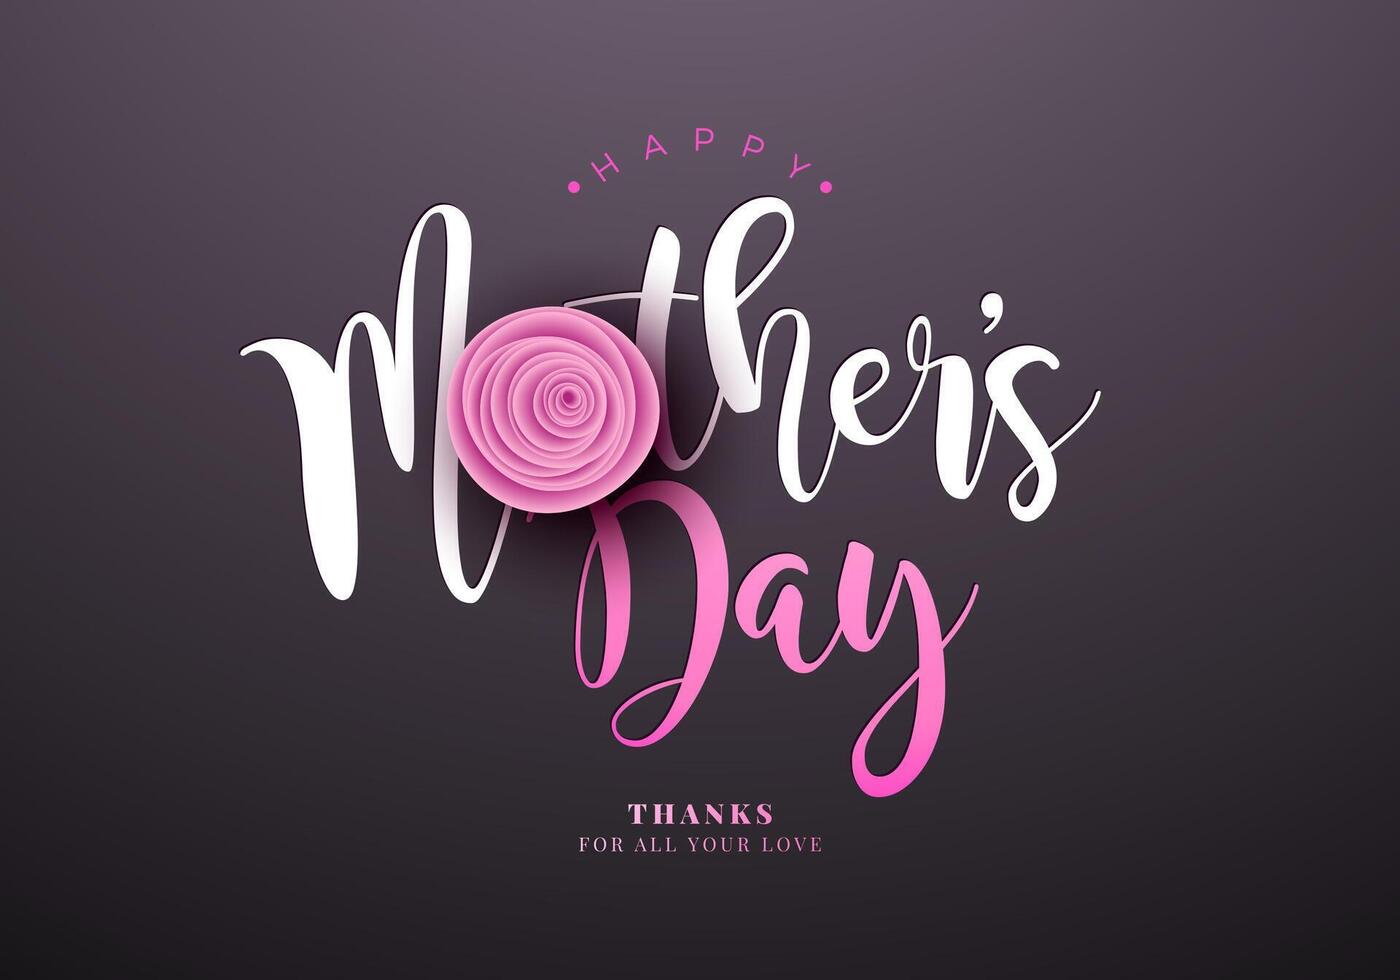 Happy Mother's Day Banner or Postcard with Rose Flower and Typography Lettering on Dark Background. Vector Mom Celebration Design with Symbol of Love for Greeting Card, Flyer, Invitation, Brochure